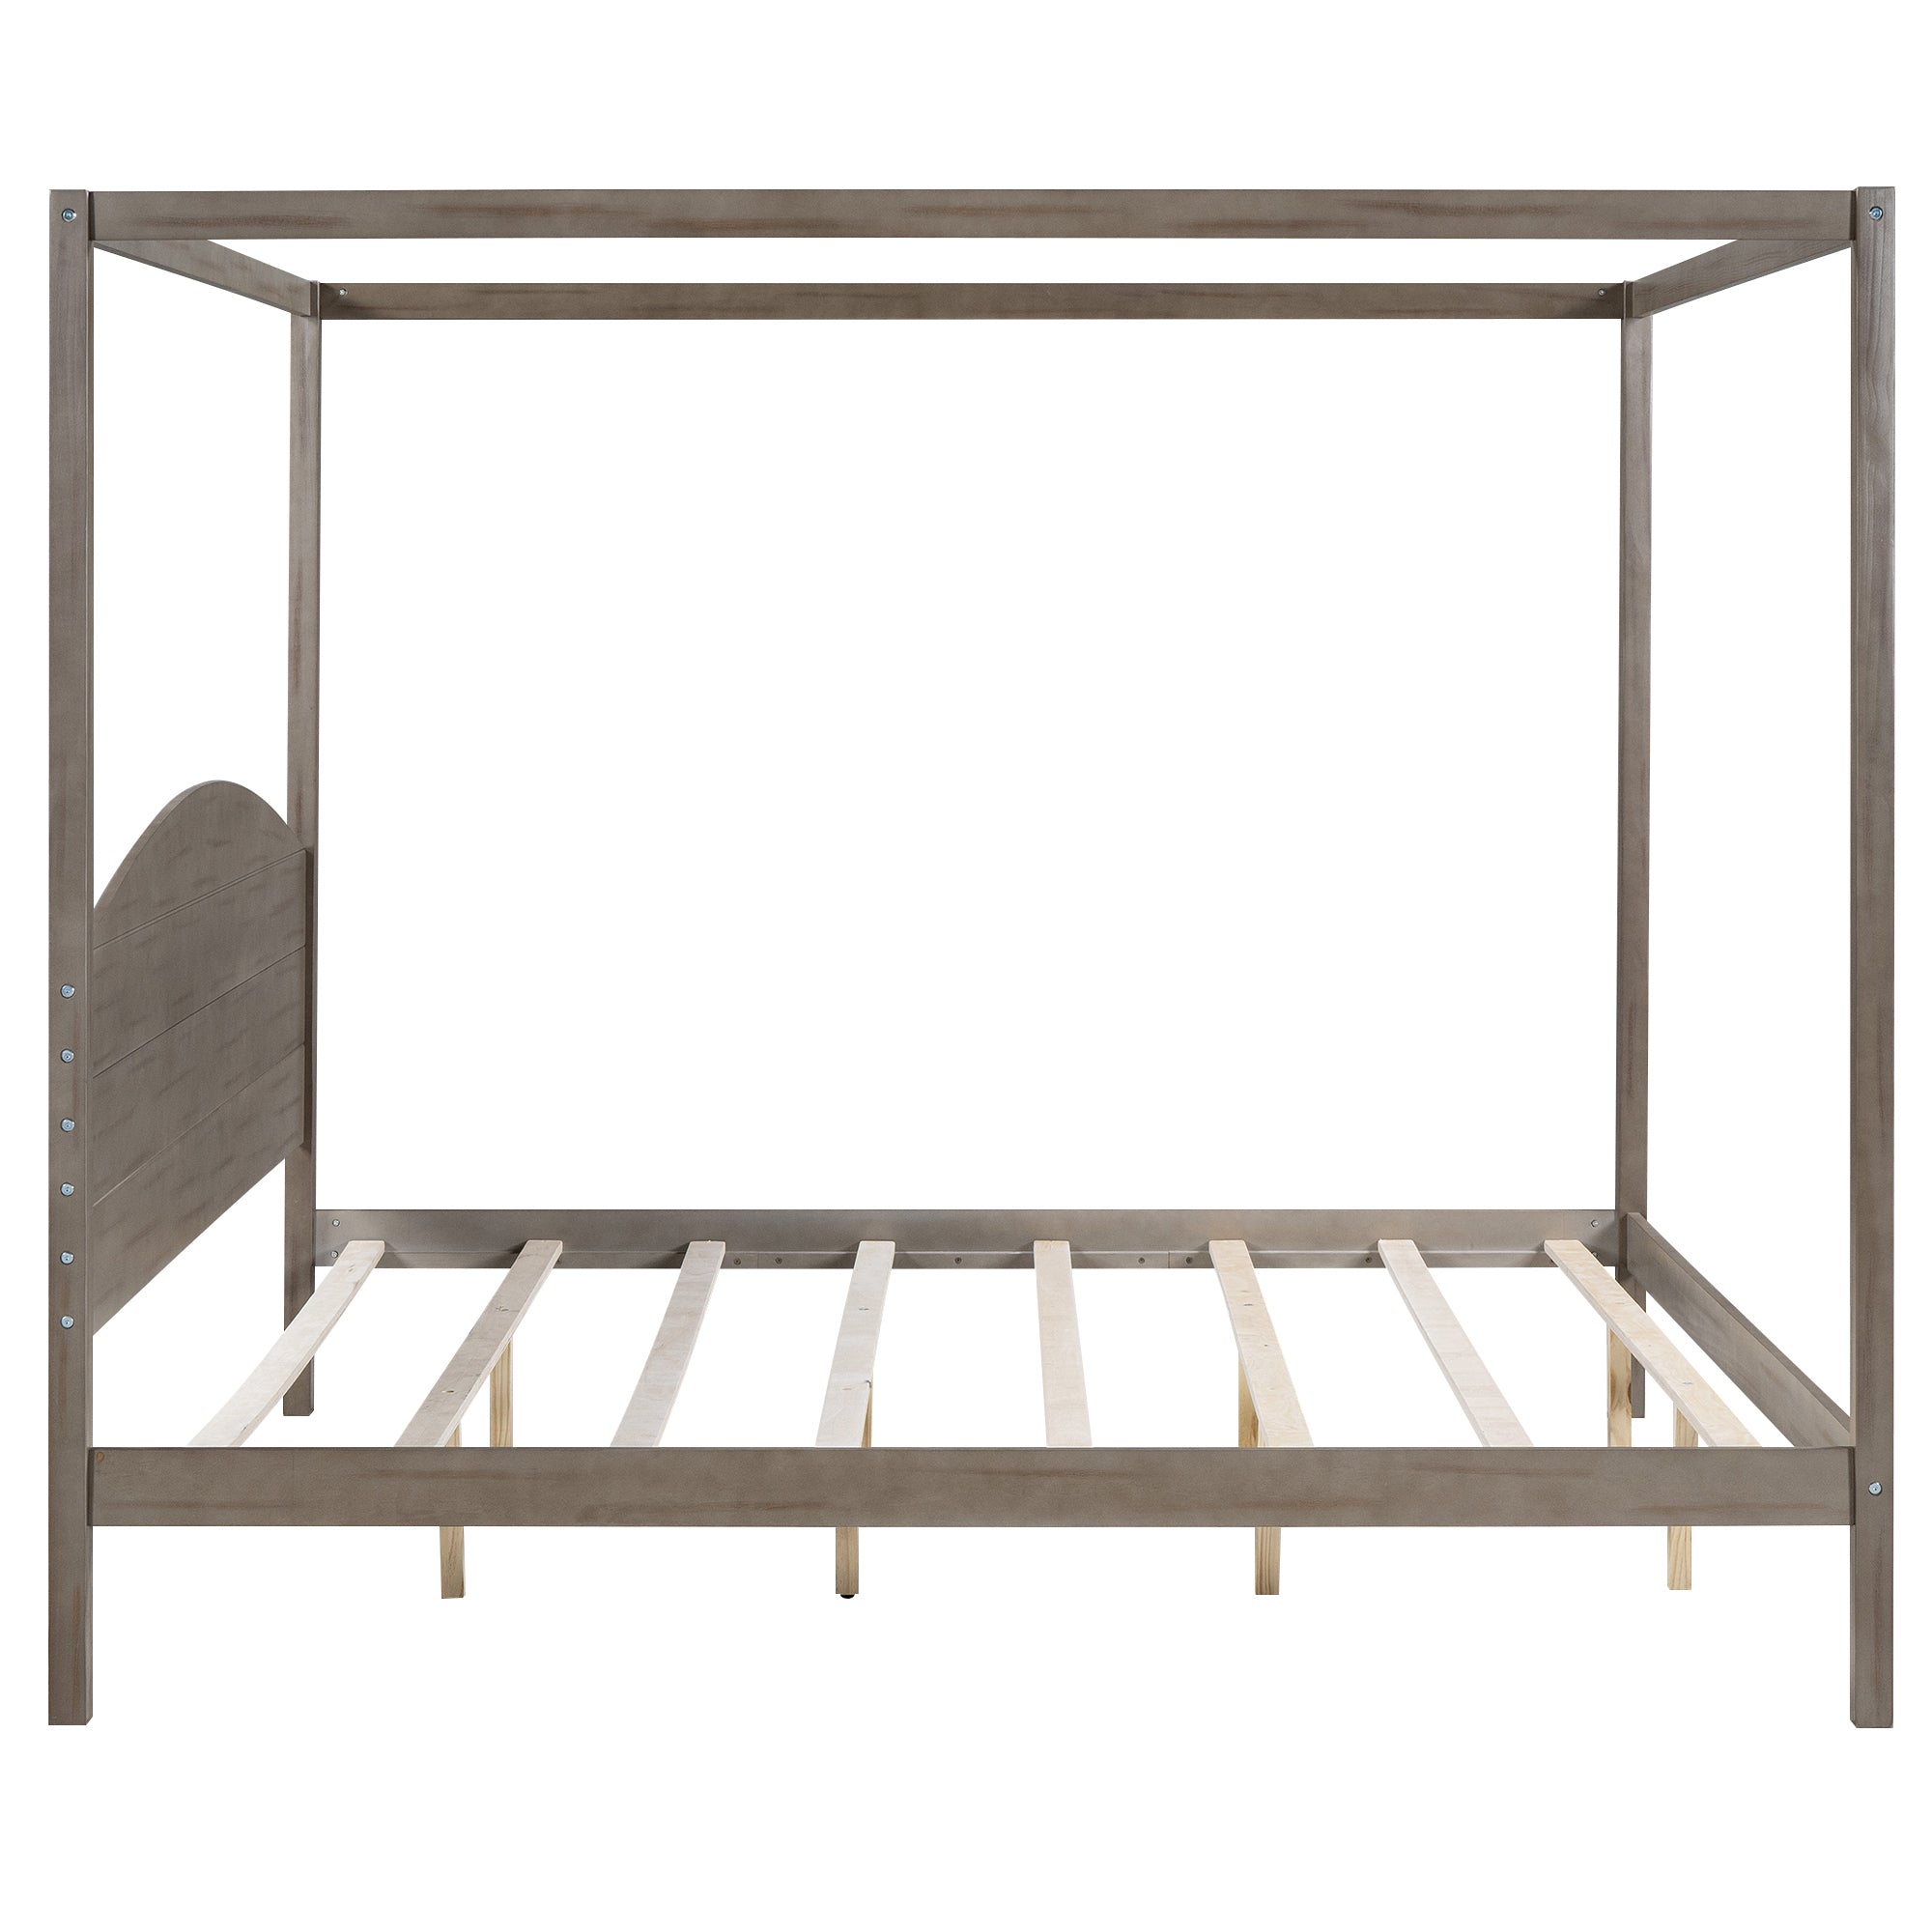 King Size Canopy Platform Bed with Headboard and Support Legs - Brown Wash